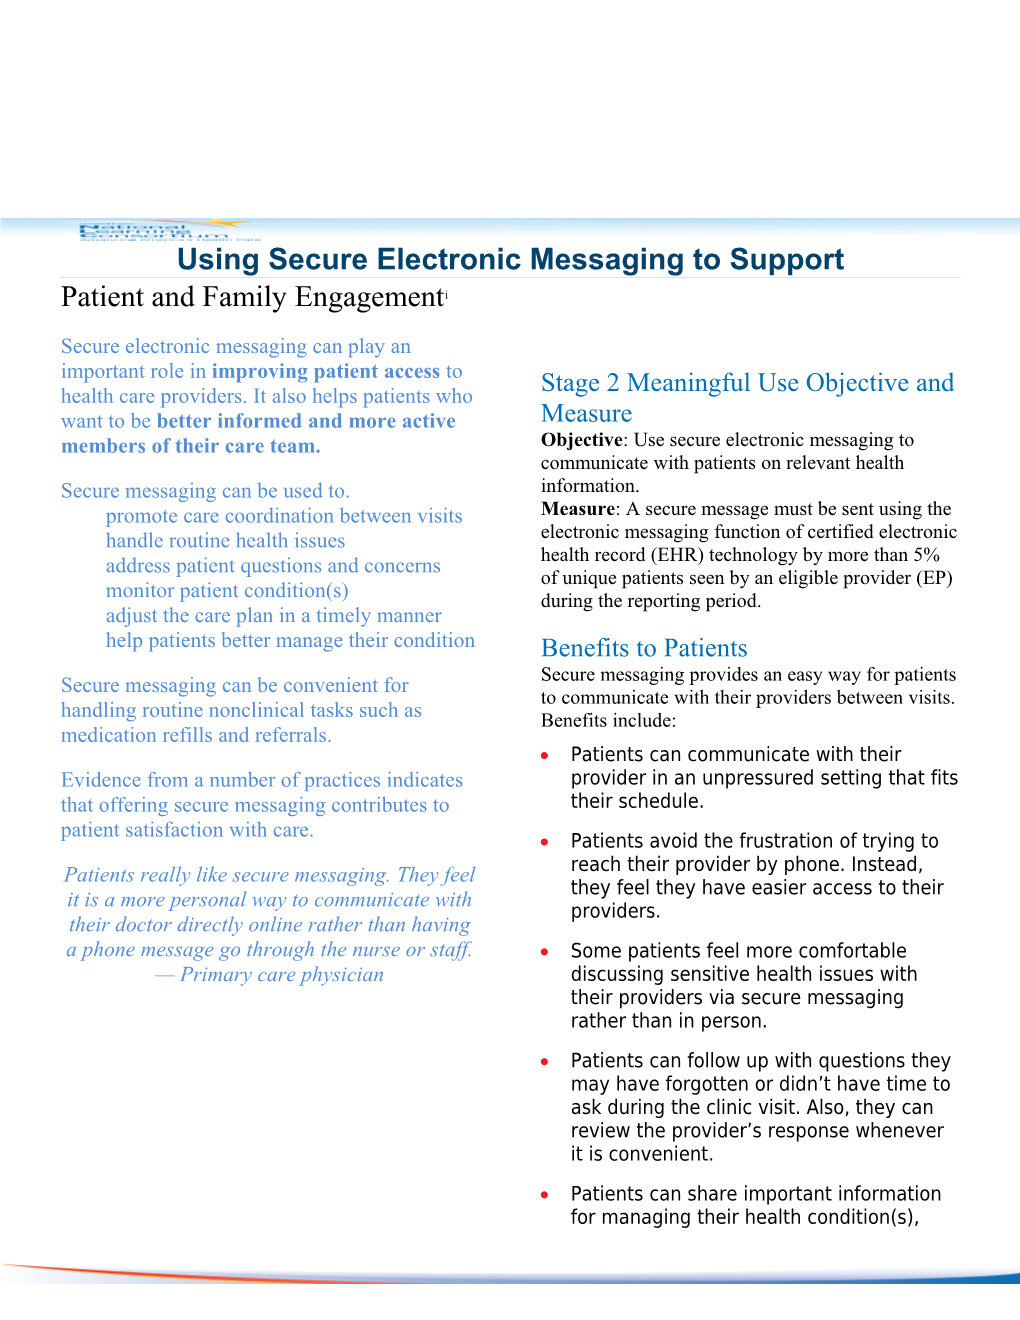 Using Secure Electronic Messaging to Support